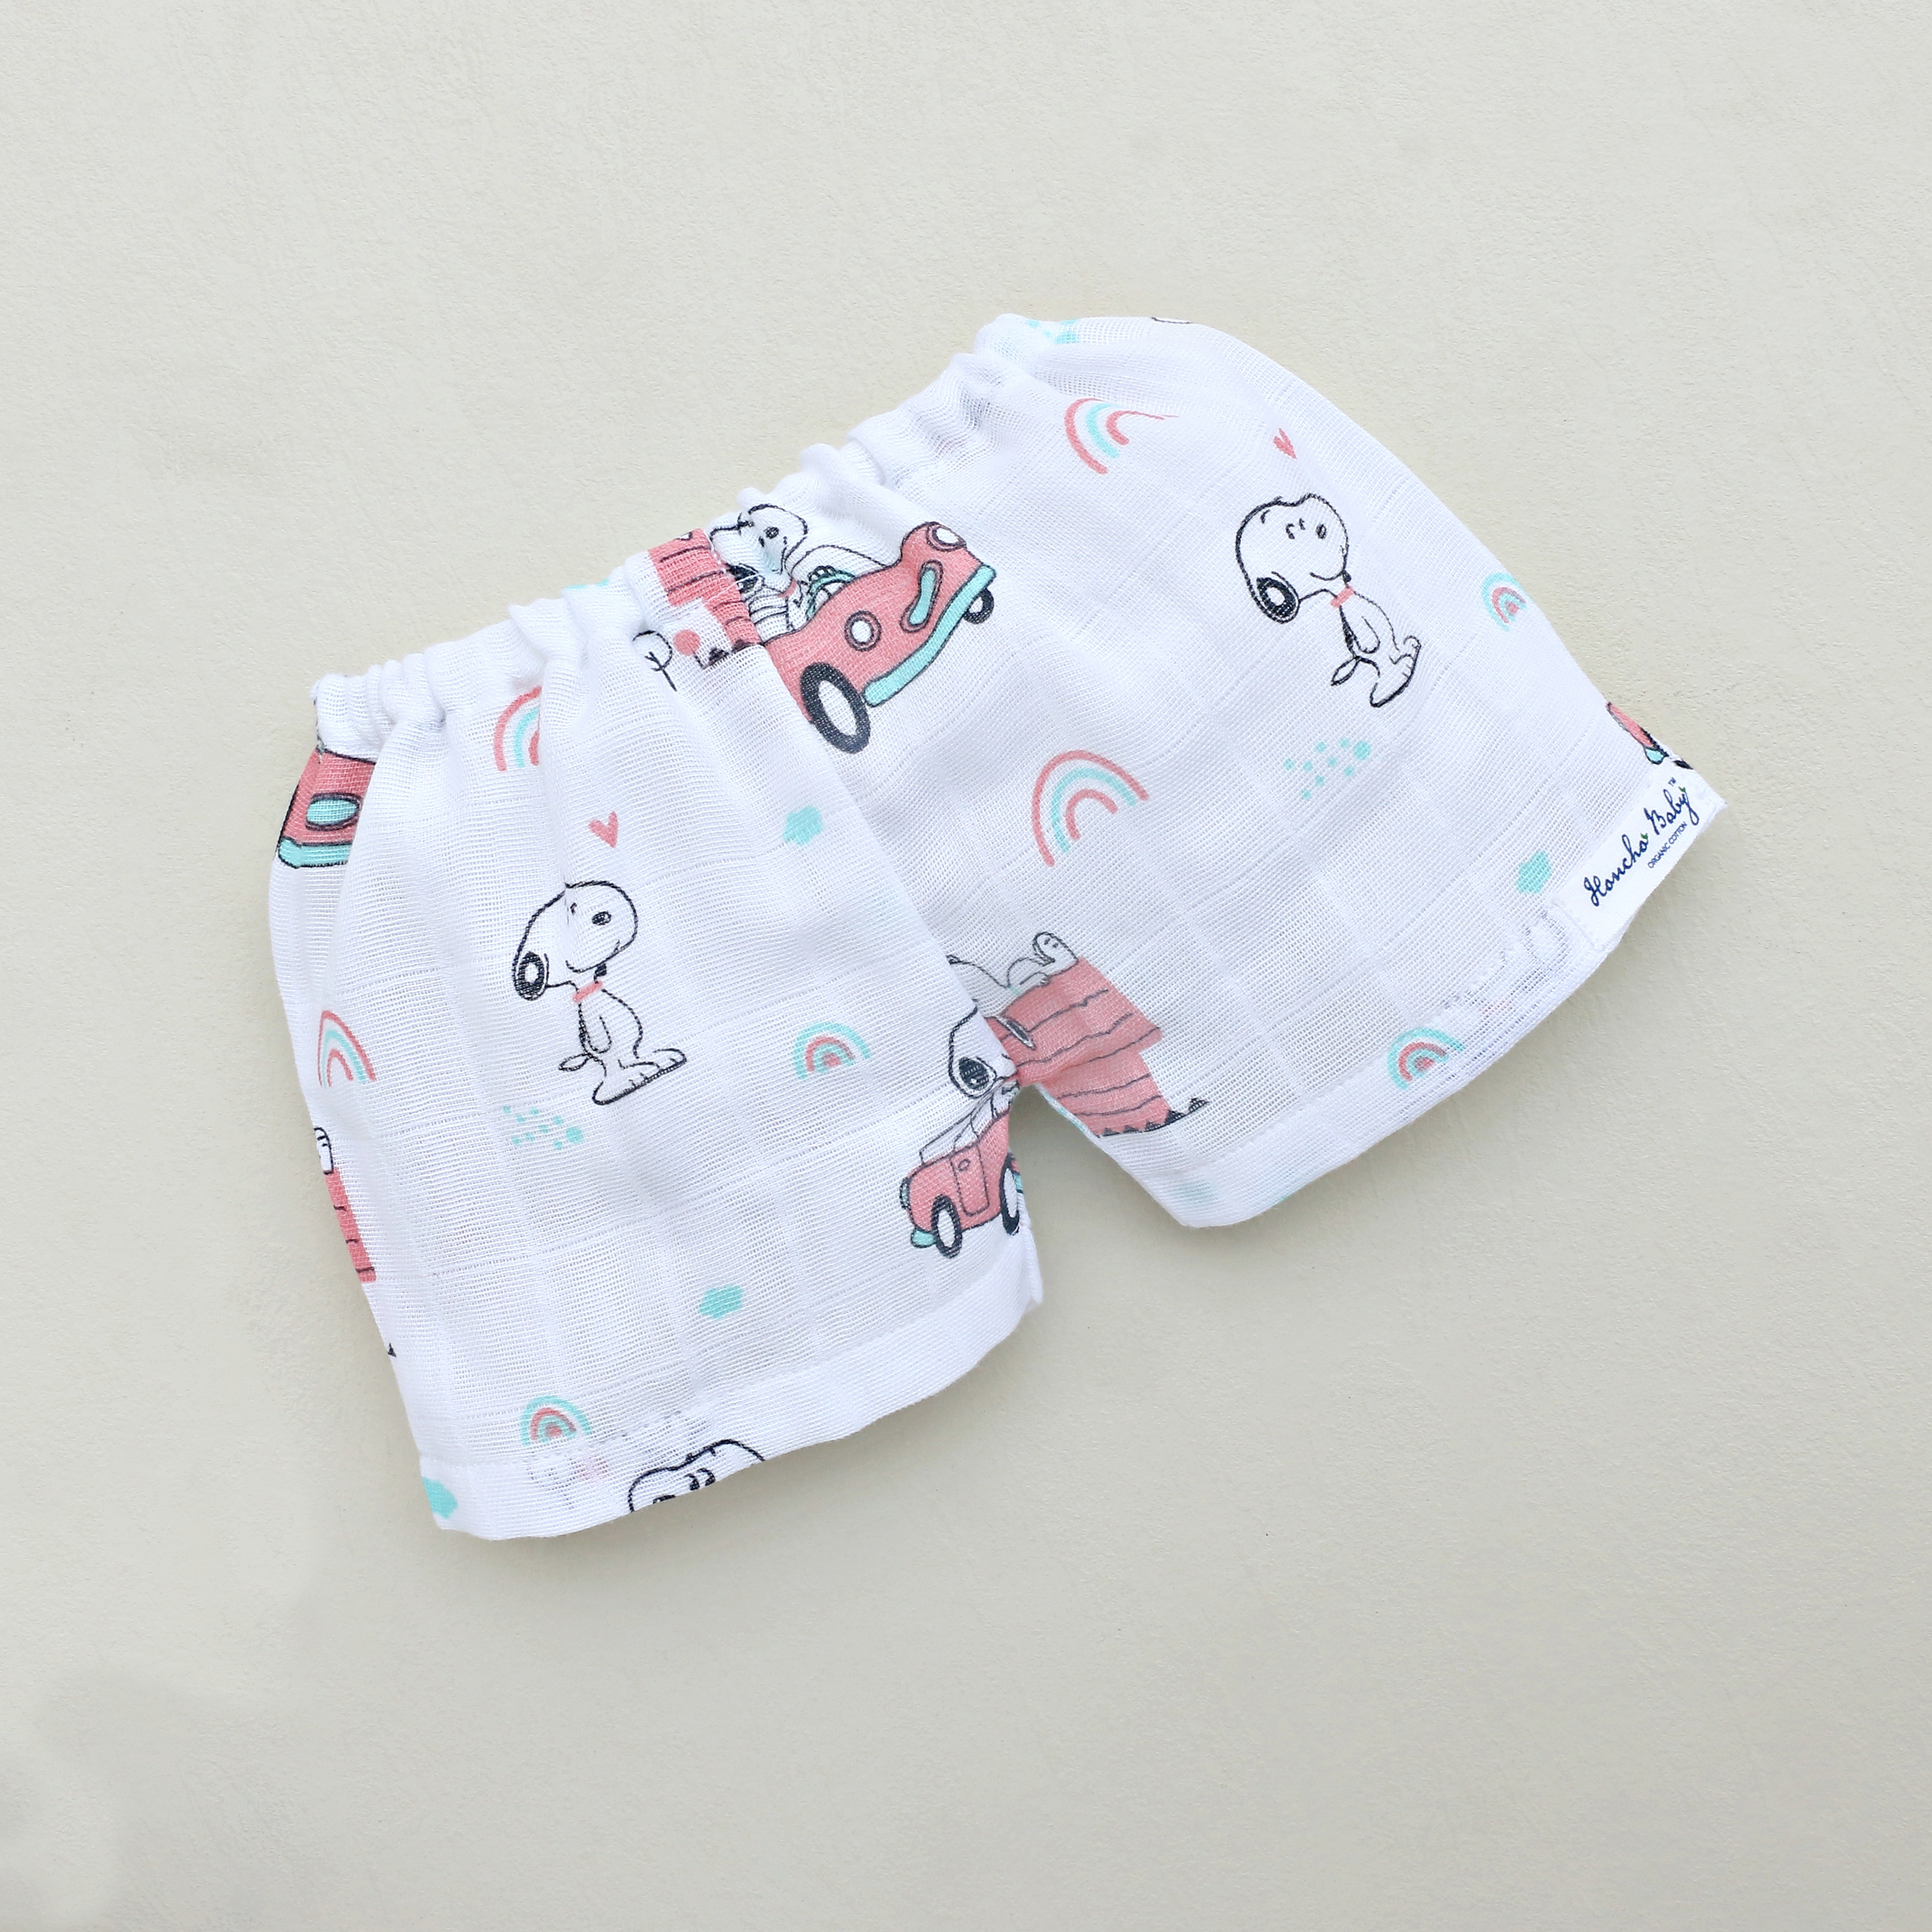 Muslin Unisex Shorts -(0 - 4 months) - Pack of 3 - S1